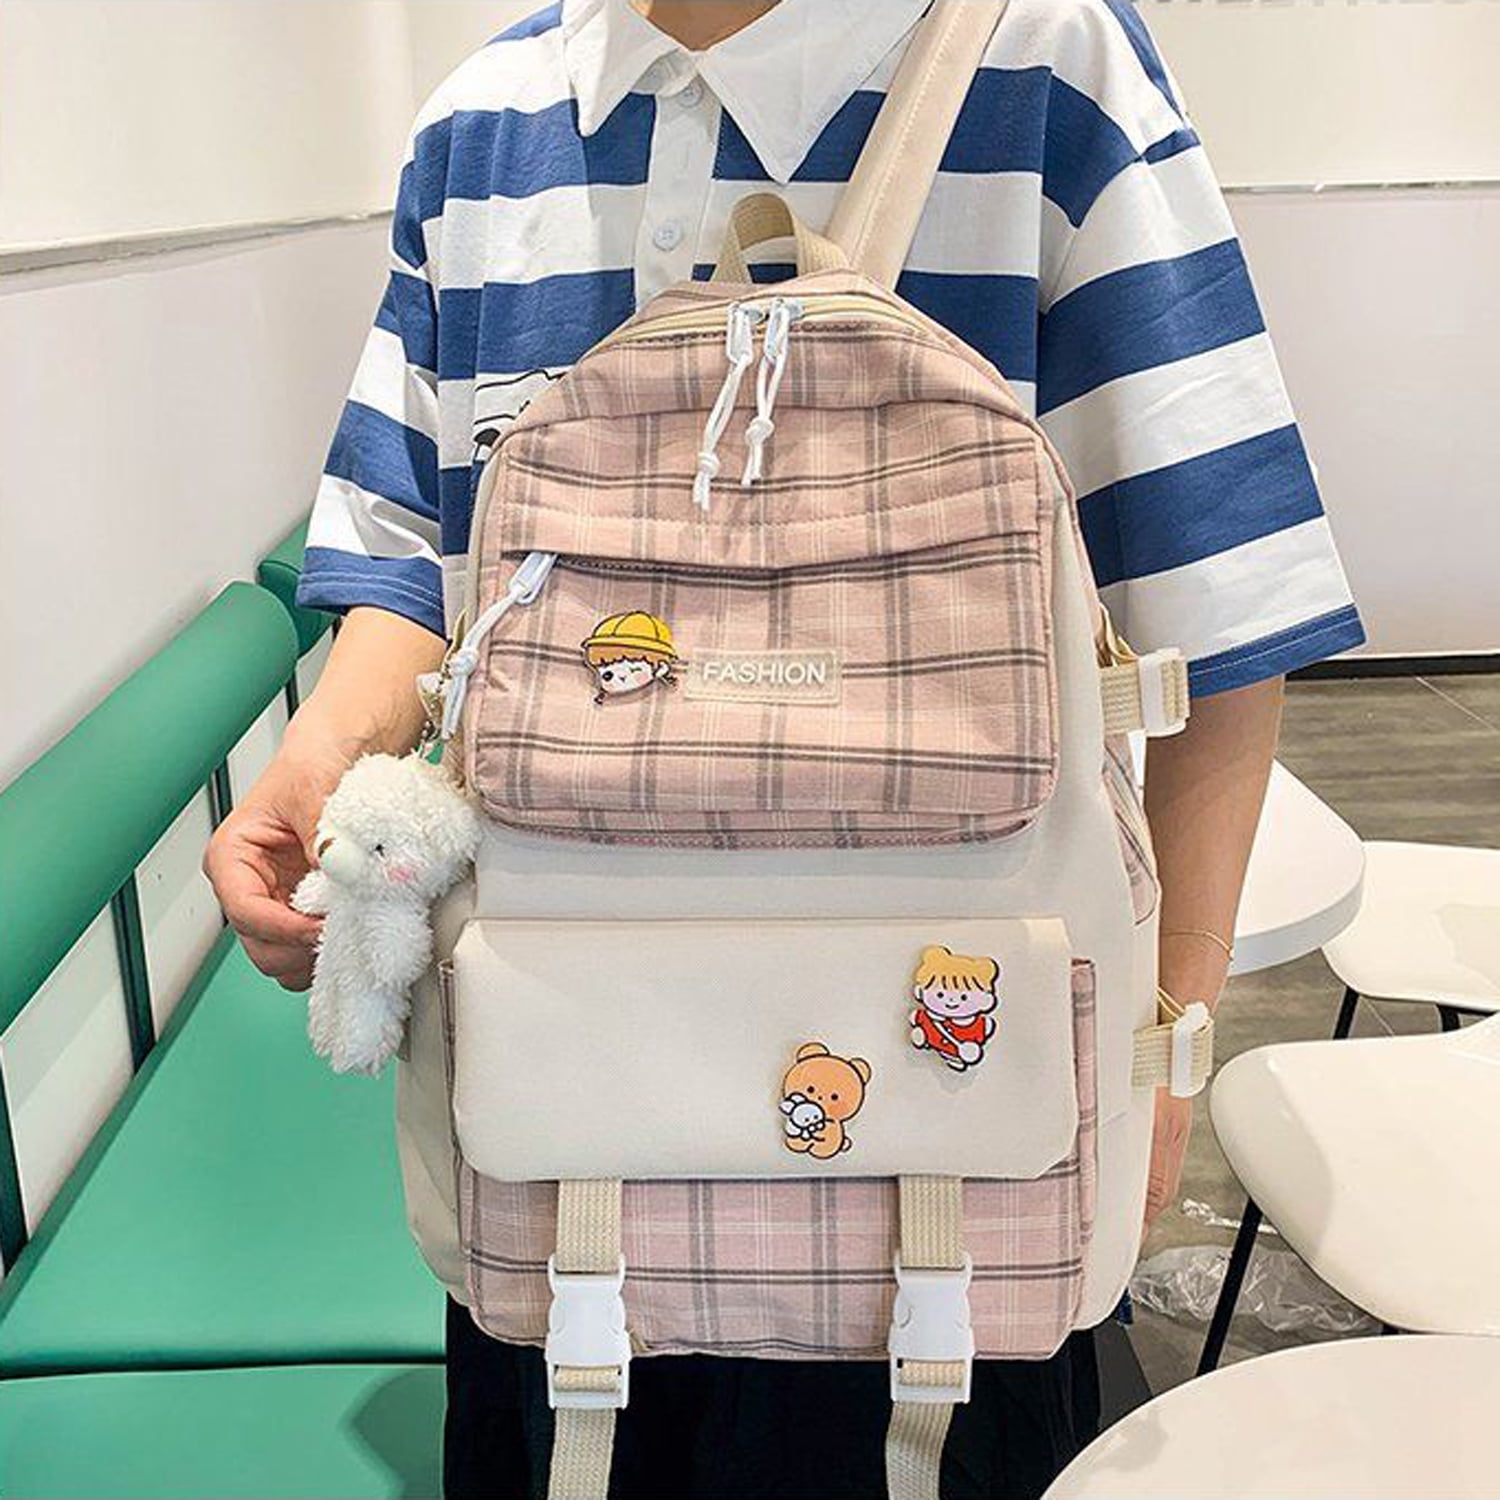 5pcs Bag Set Classic Backpack Shoulder Crossbody Bucket Bag Pencil Case  Release Buckle Decor Preppy For School With Bear Pendant Perfect for  Elementary School,Middle School,High School,Back to School